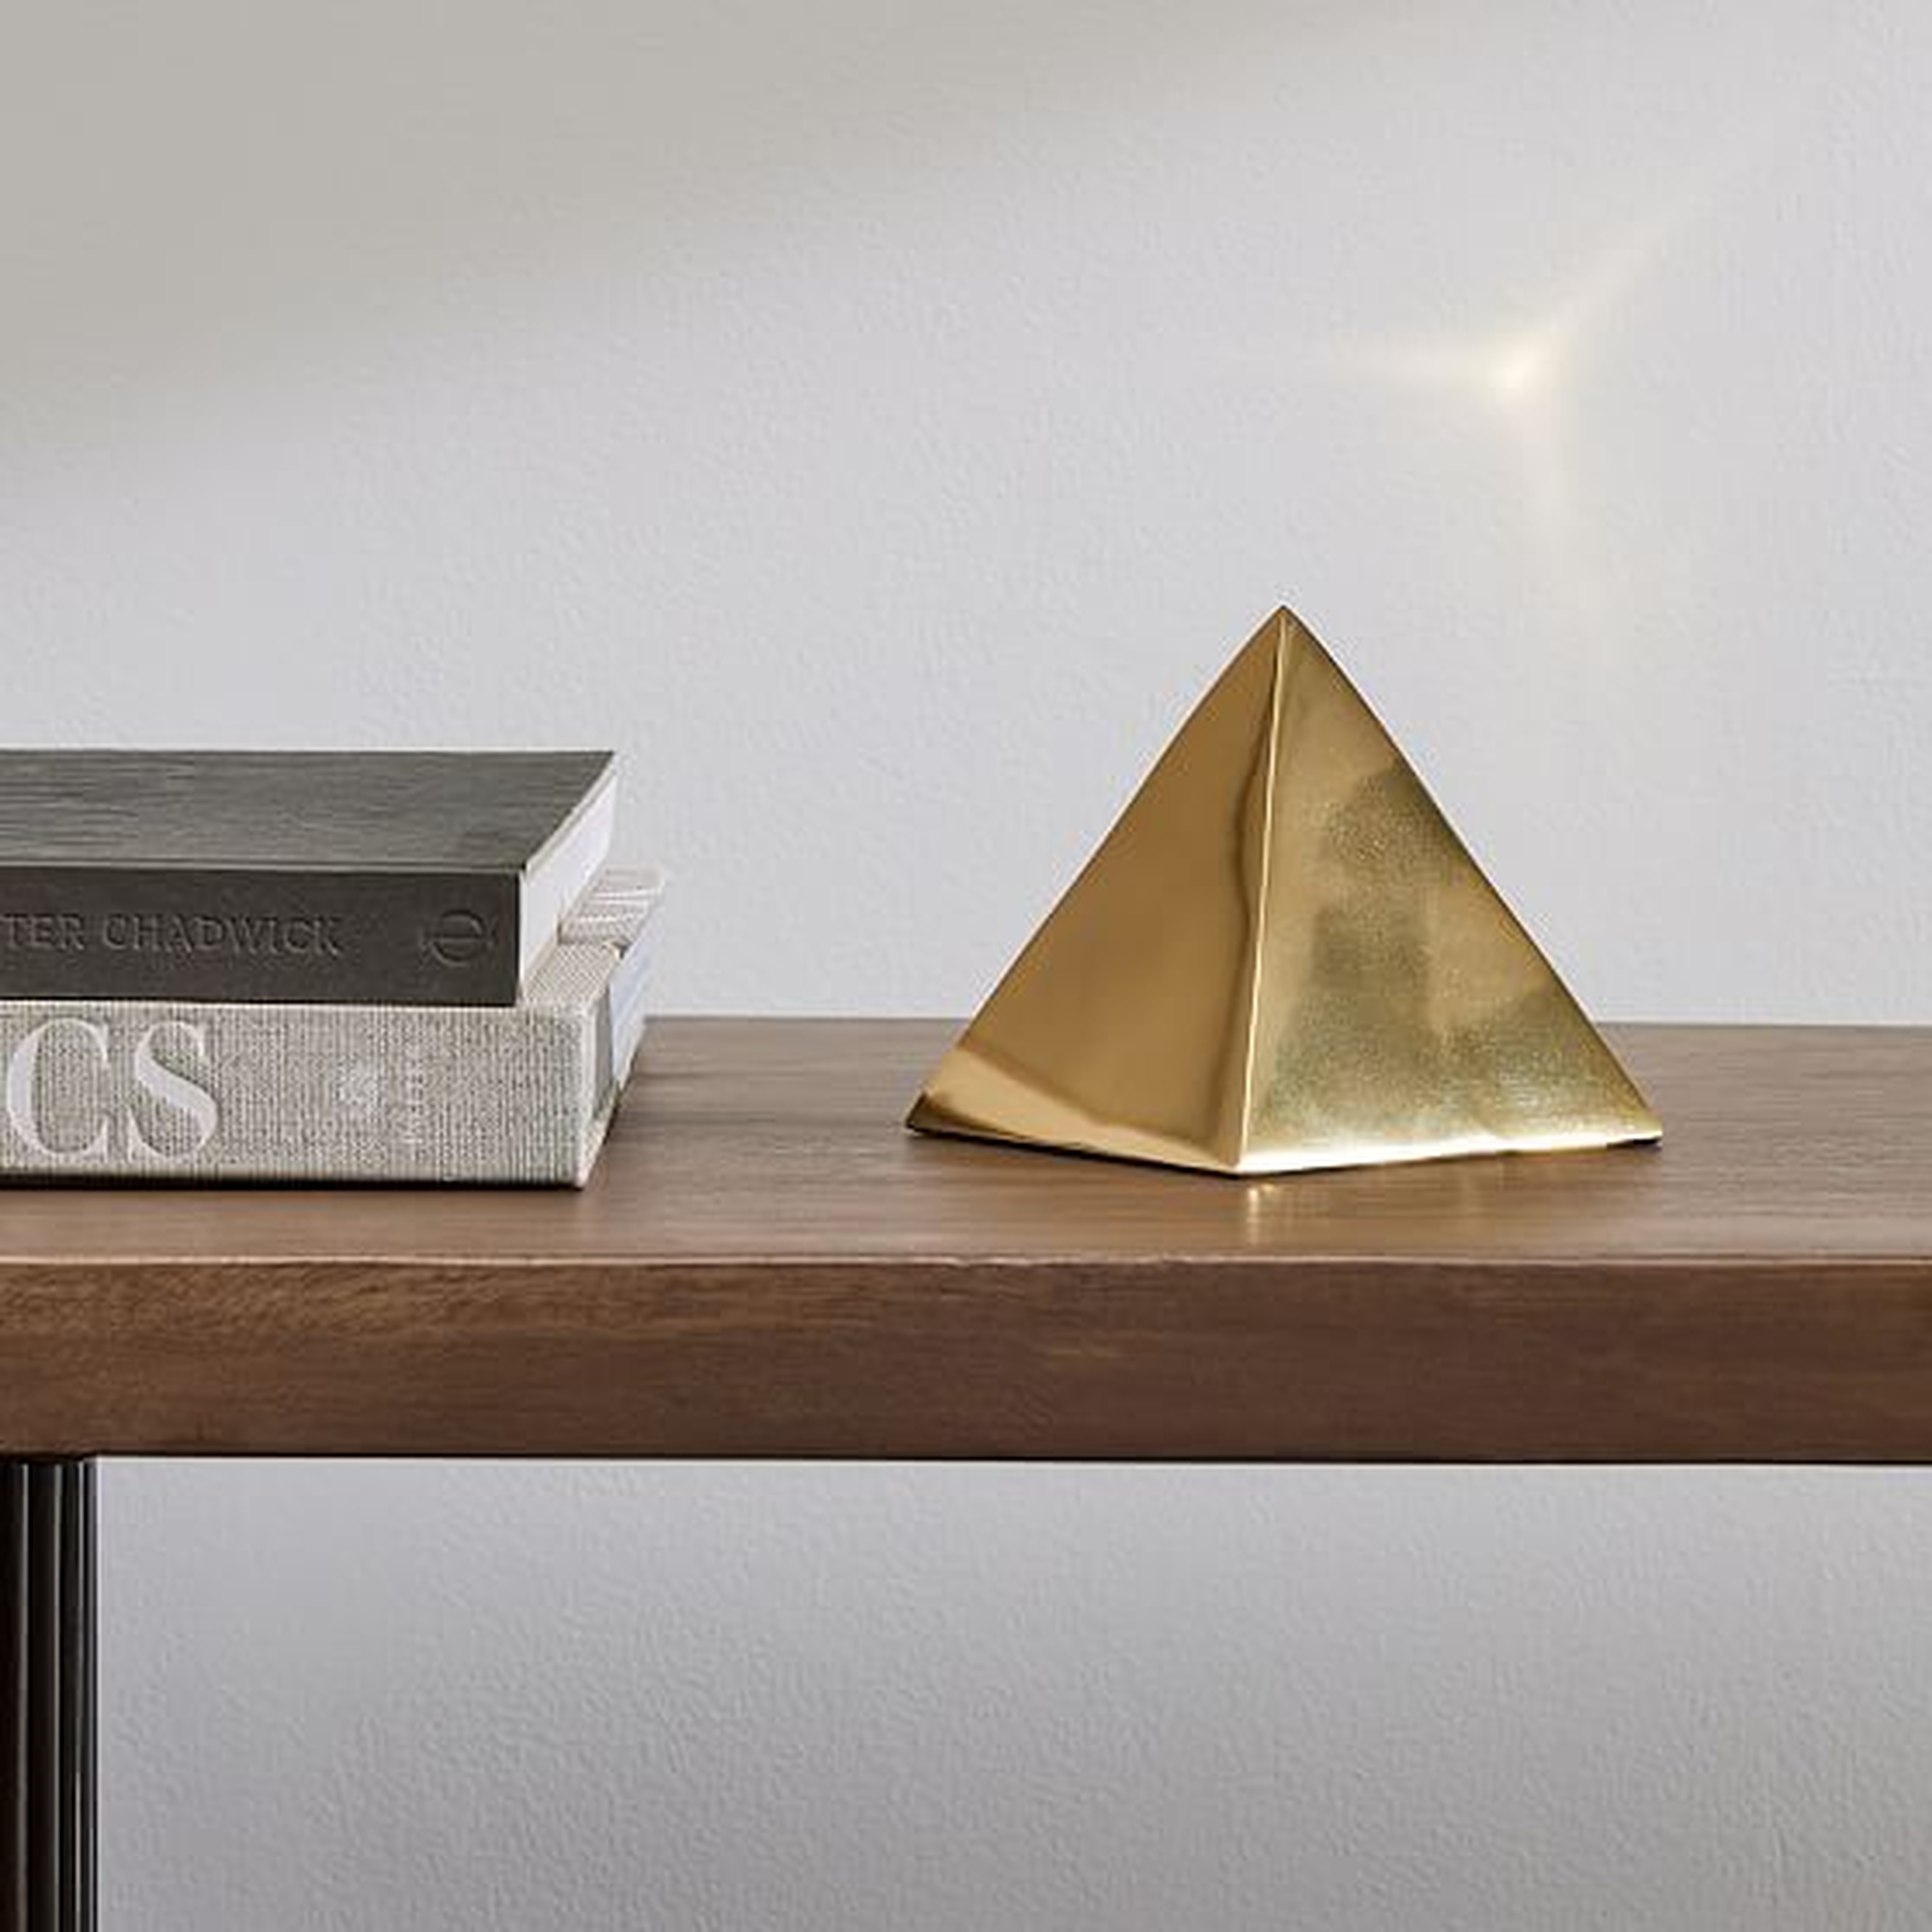 Extruded Shape Objects Pyramid Antique Brass - West Elm